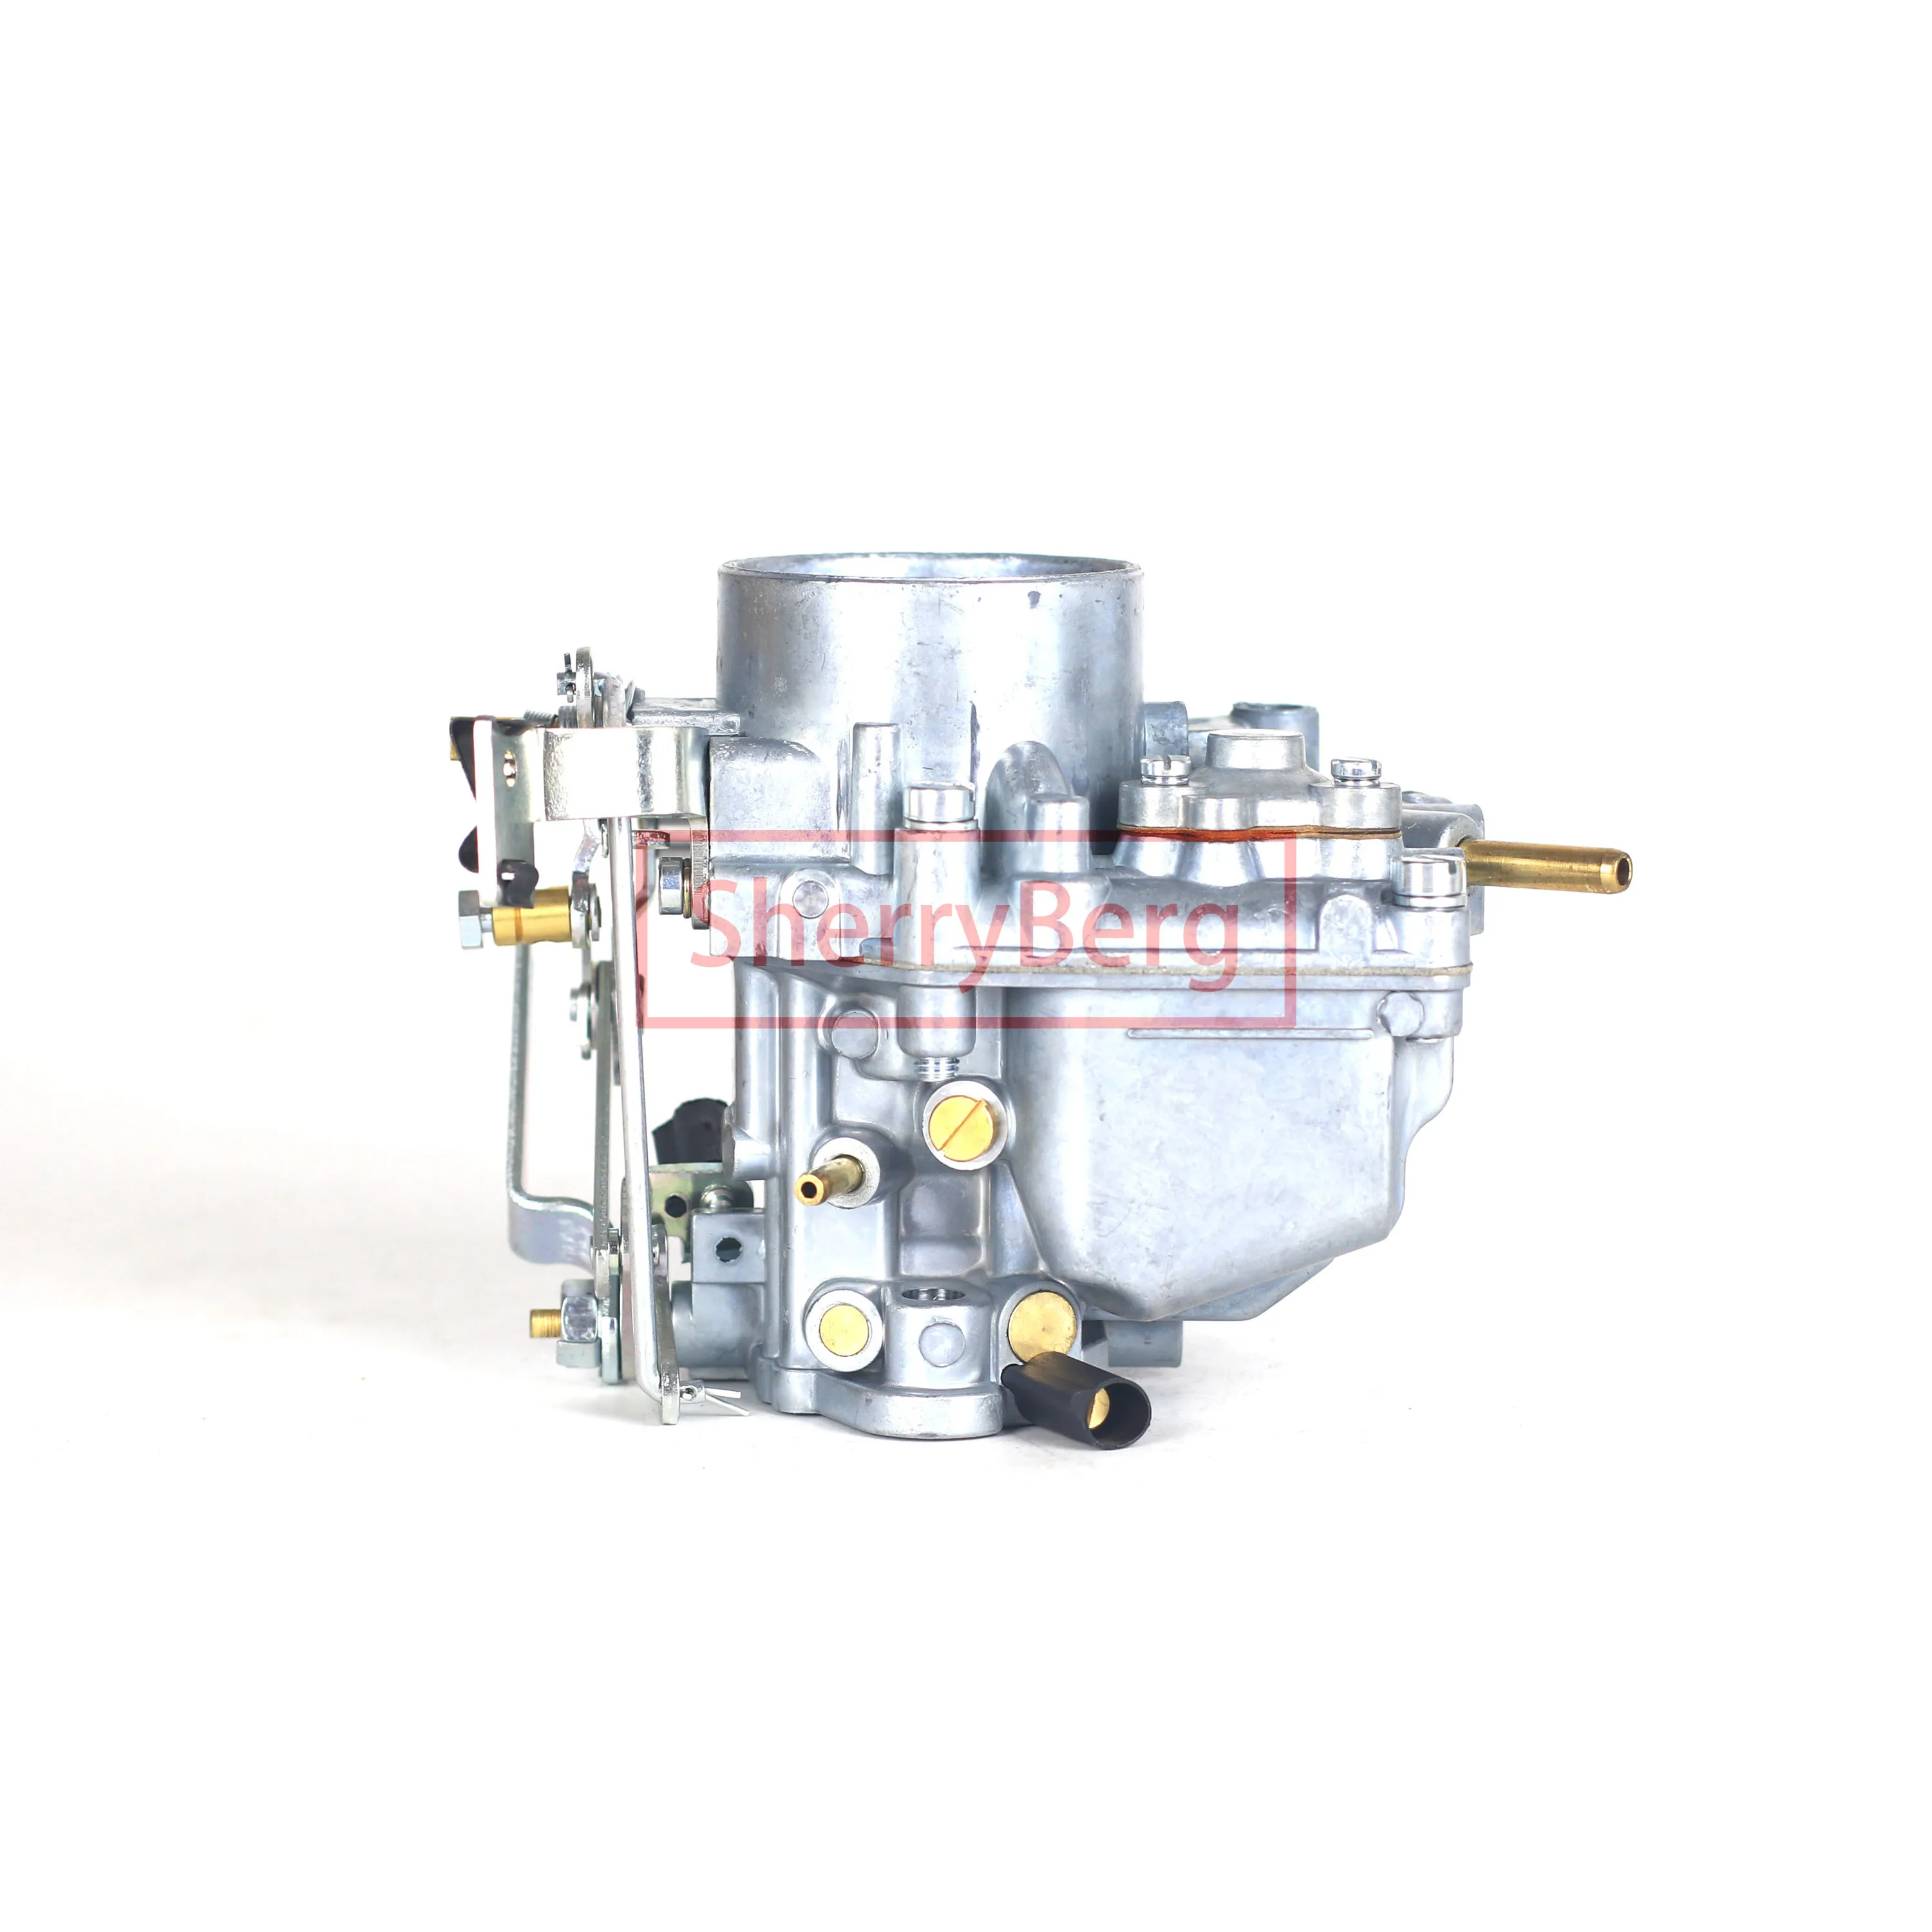 SherryBerg Carburetto Carby Carb Vergaser За SOLEX Zenith 36IV Карбуратор 2 1/4 2.25 Бензин за Land Rover Series 2,2a 3 Carbu Изображение 2